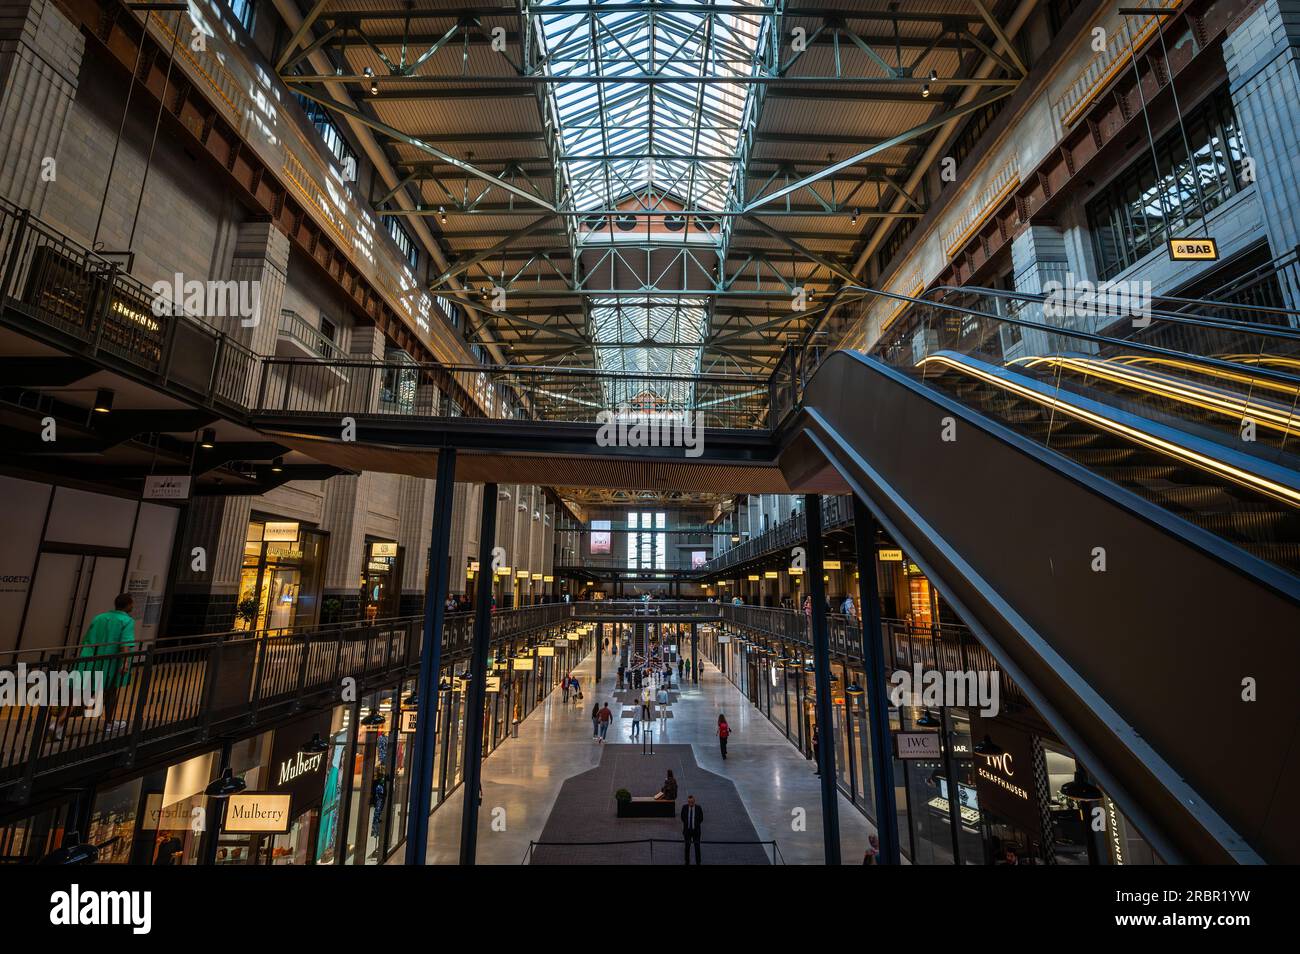 Battersea, London, UK: Battersea Power Station now redeveloped as a shopping and leisure destination. Interior of Turbine Hall A with escalator. Stock Photo